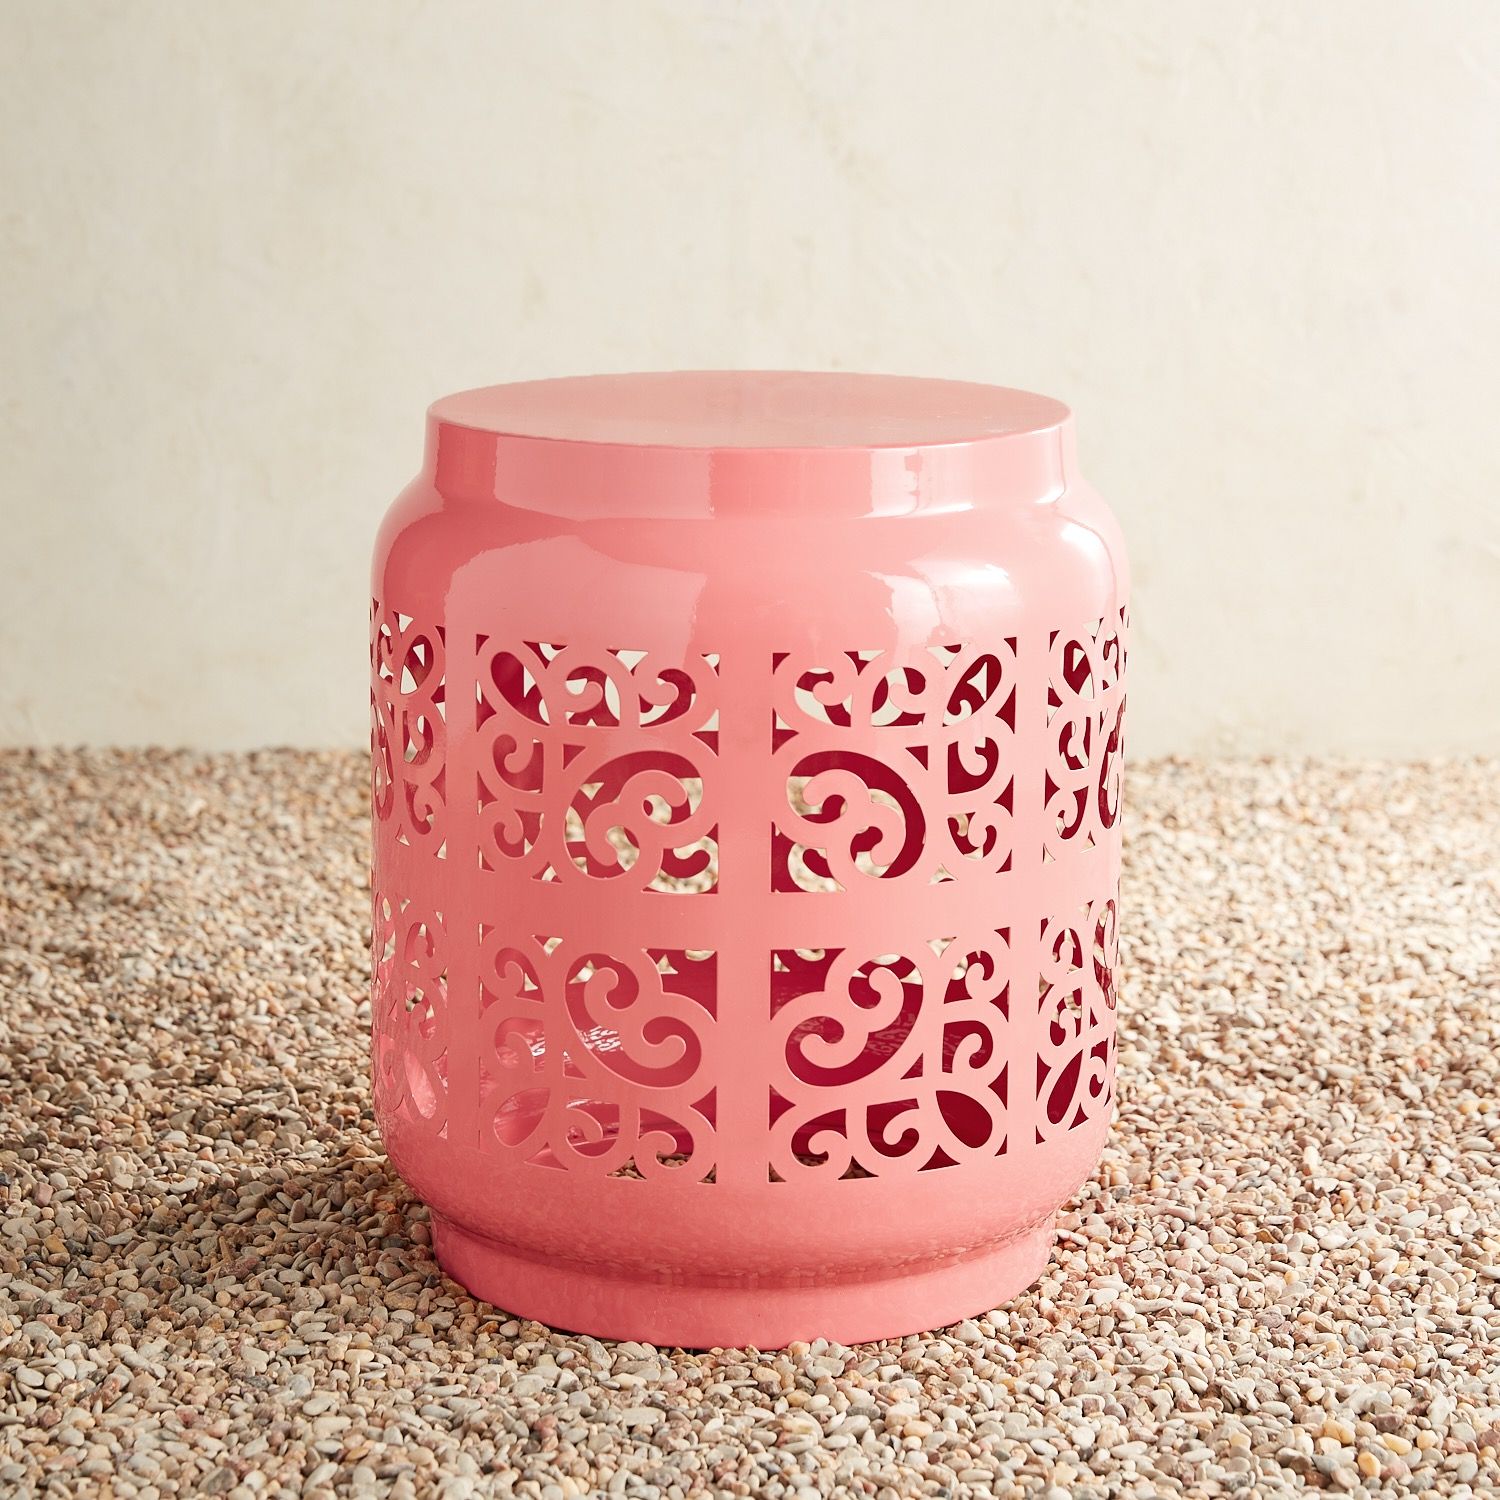 coral metal eyelet accent table pier imports pink outdoor furniture brisbane target storage small desks for spaces victorian occasional bedroom manufacturers giant wall clock